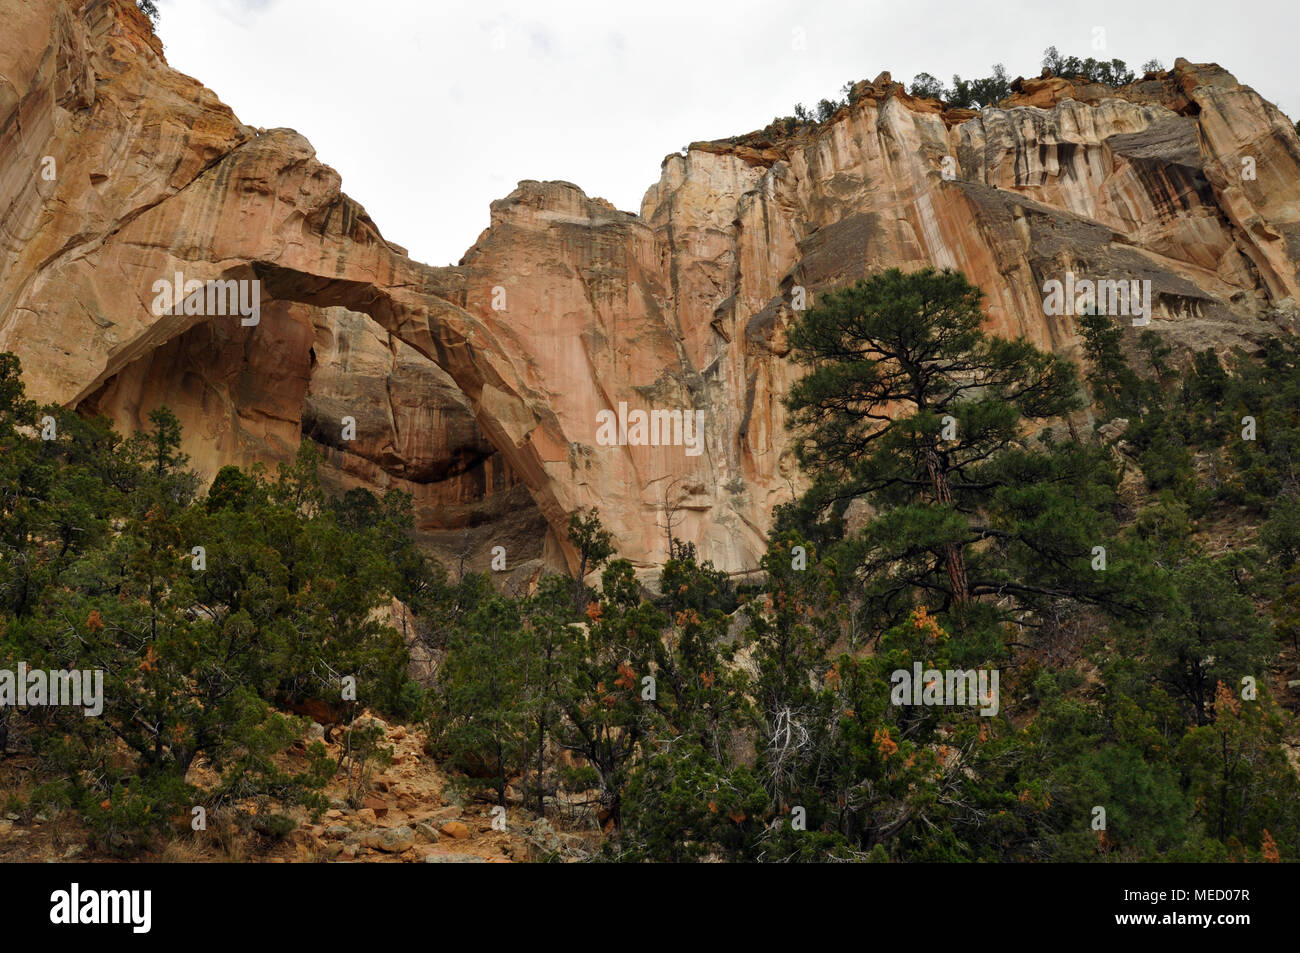 The sandstone La Ventana Natural Arch in the El Malpais National Conservation Area south of Grants, New Mexico. Stock Photo